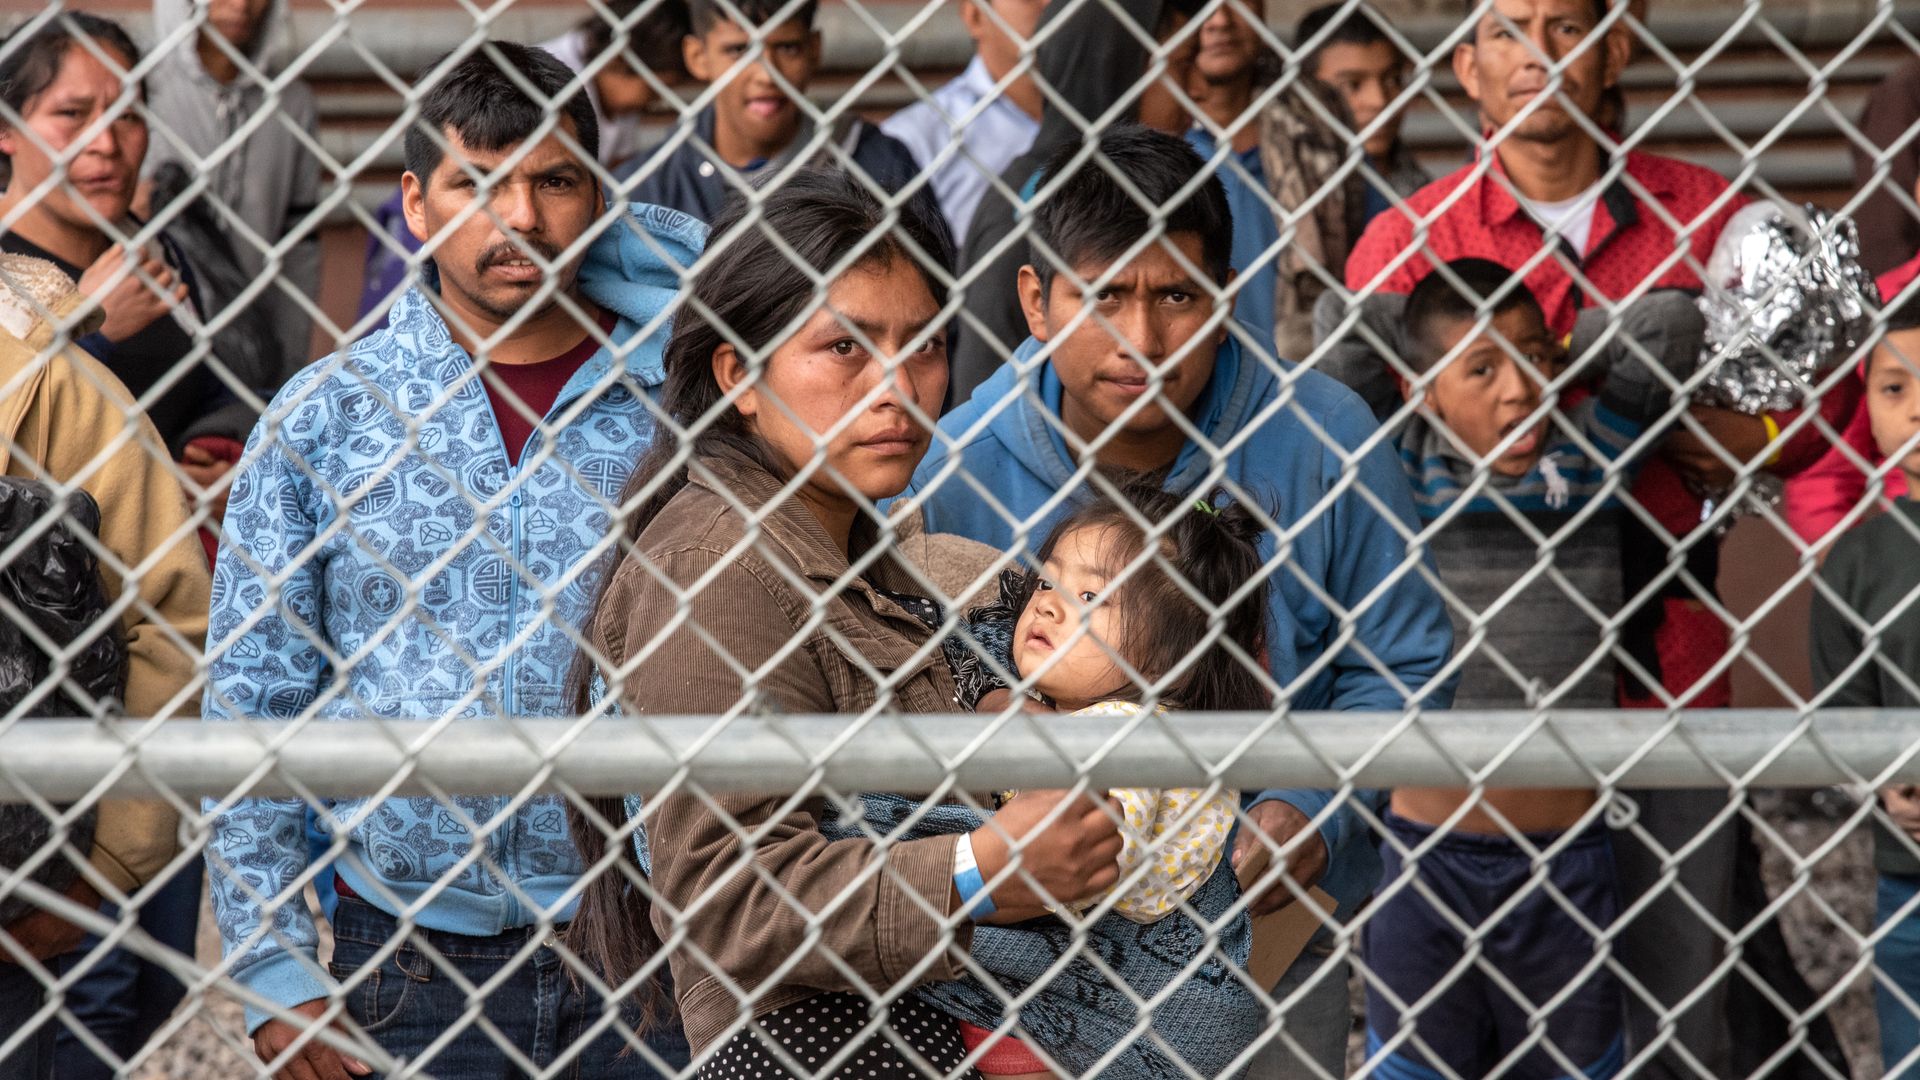 Migrants are gathered inside the fence of a makeshift detention center